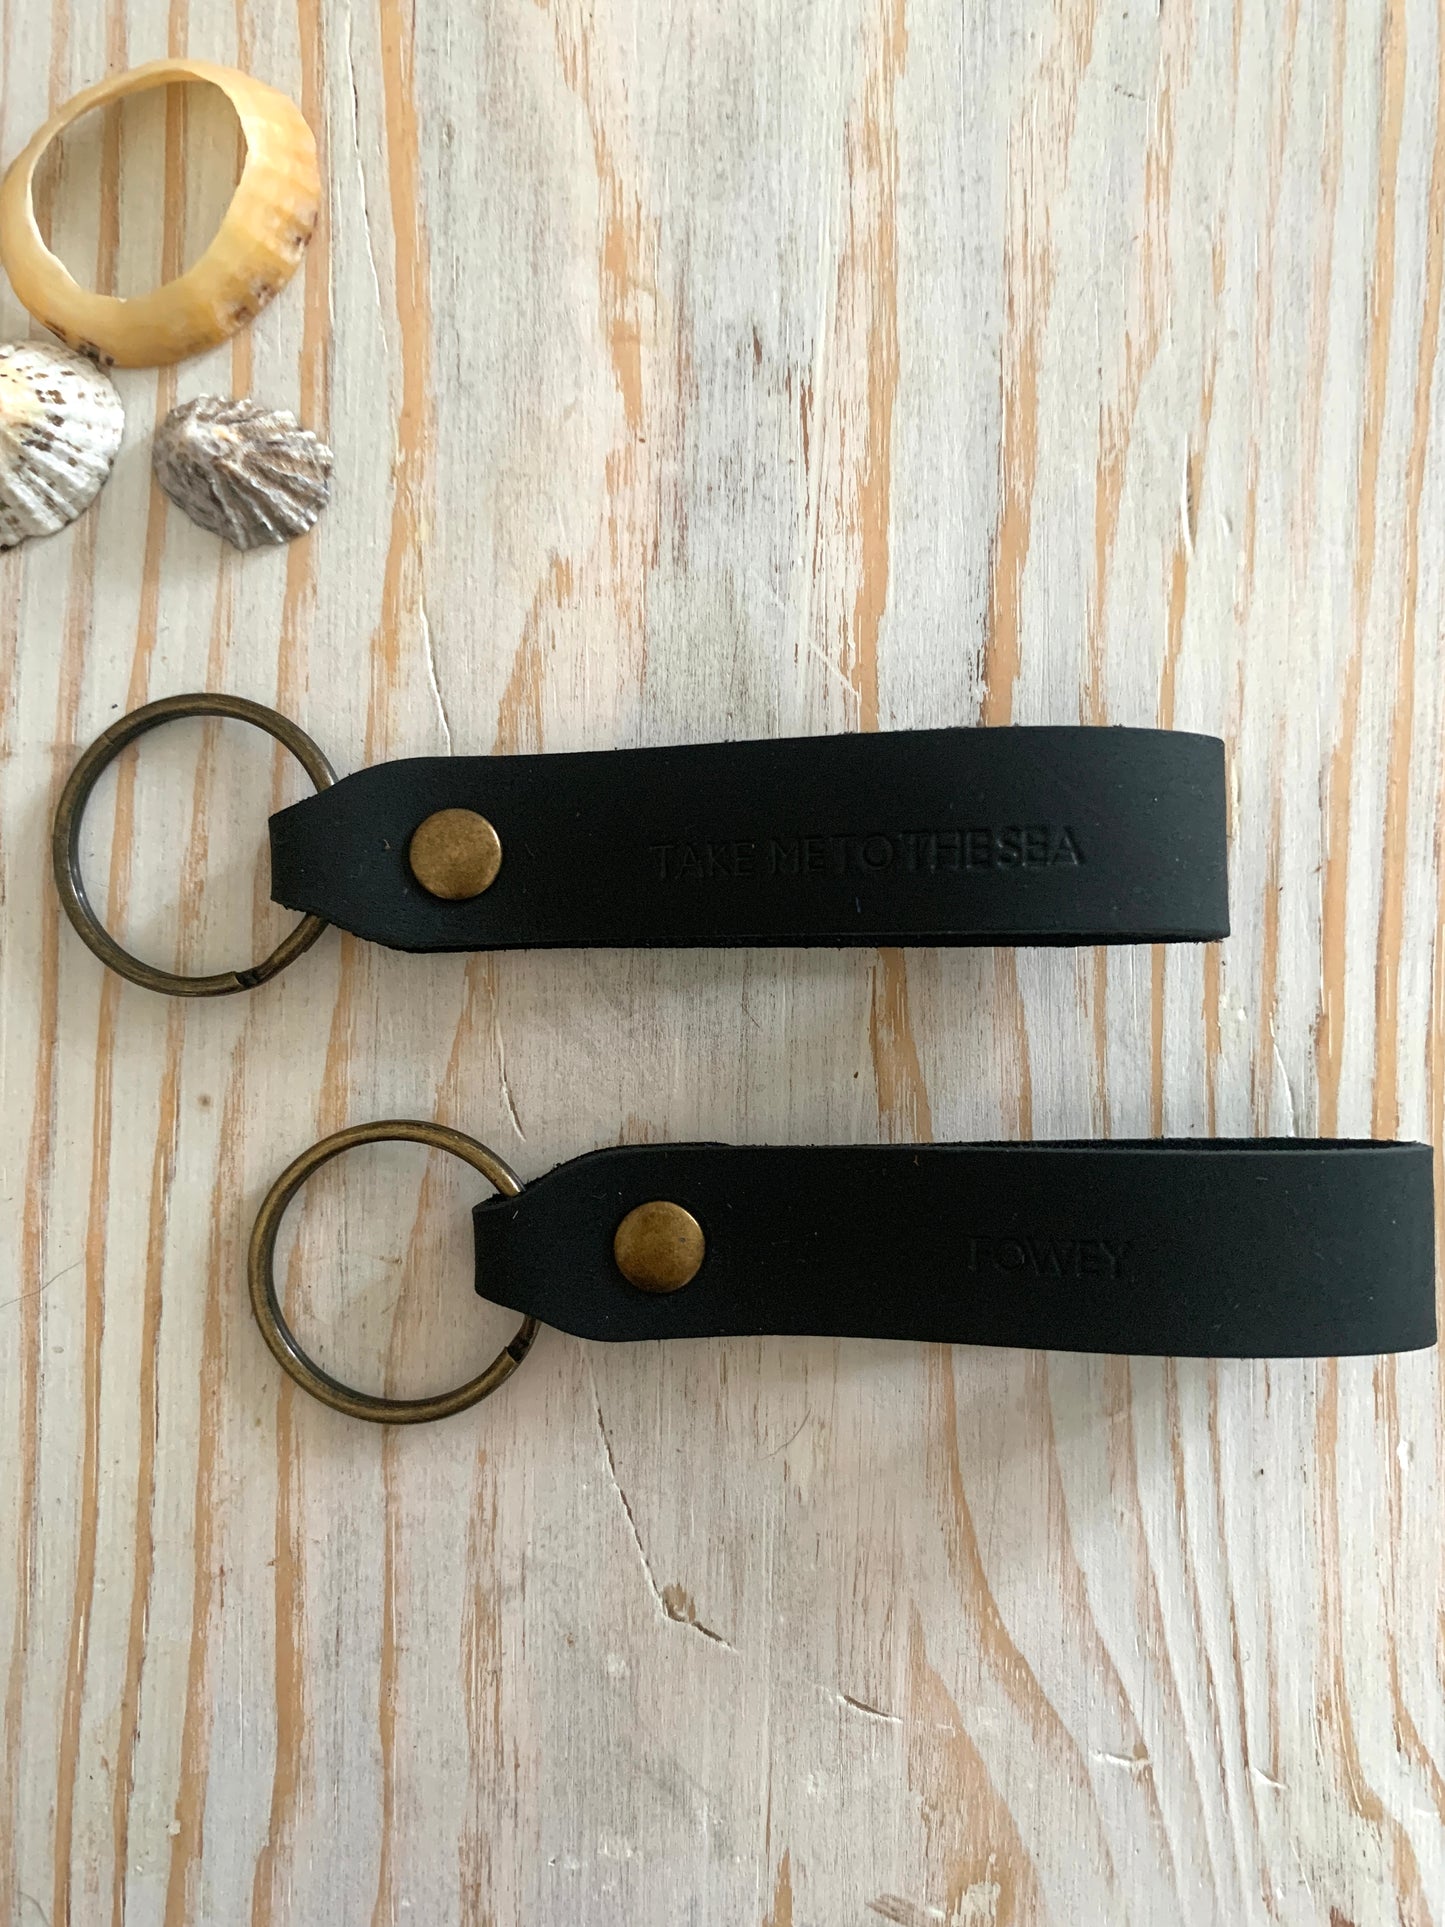 Handmade Stamped Leather Keyring: Fowey or Take Me To The Sea